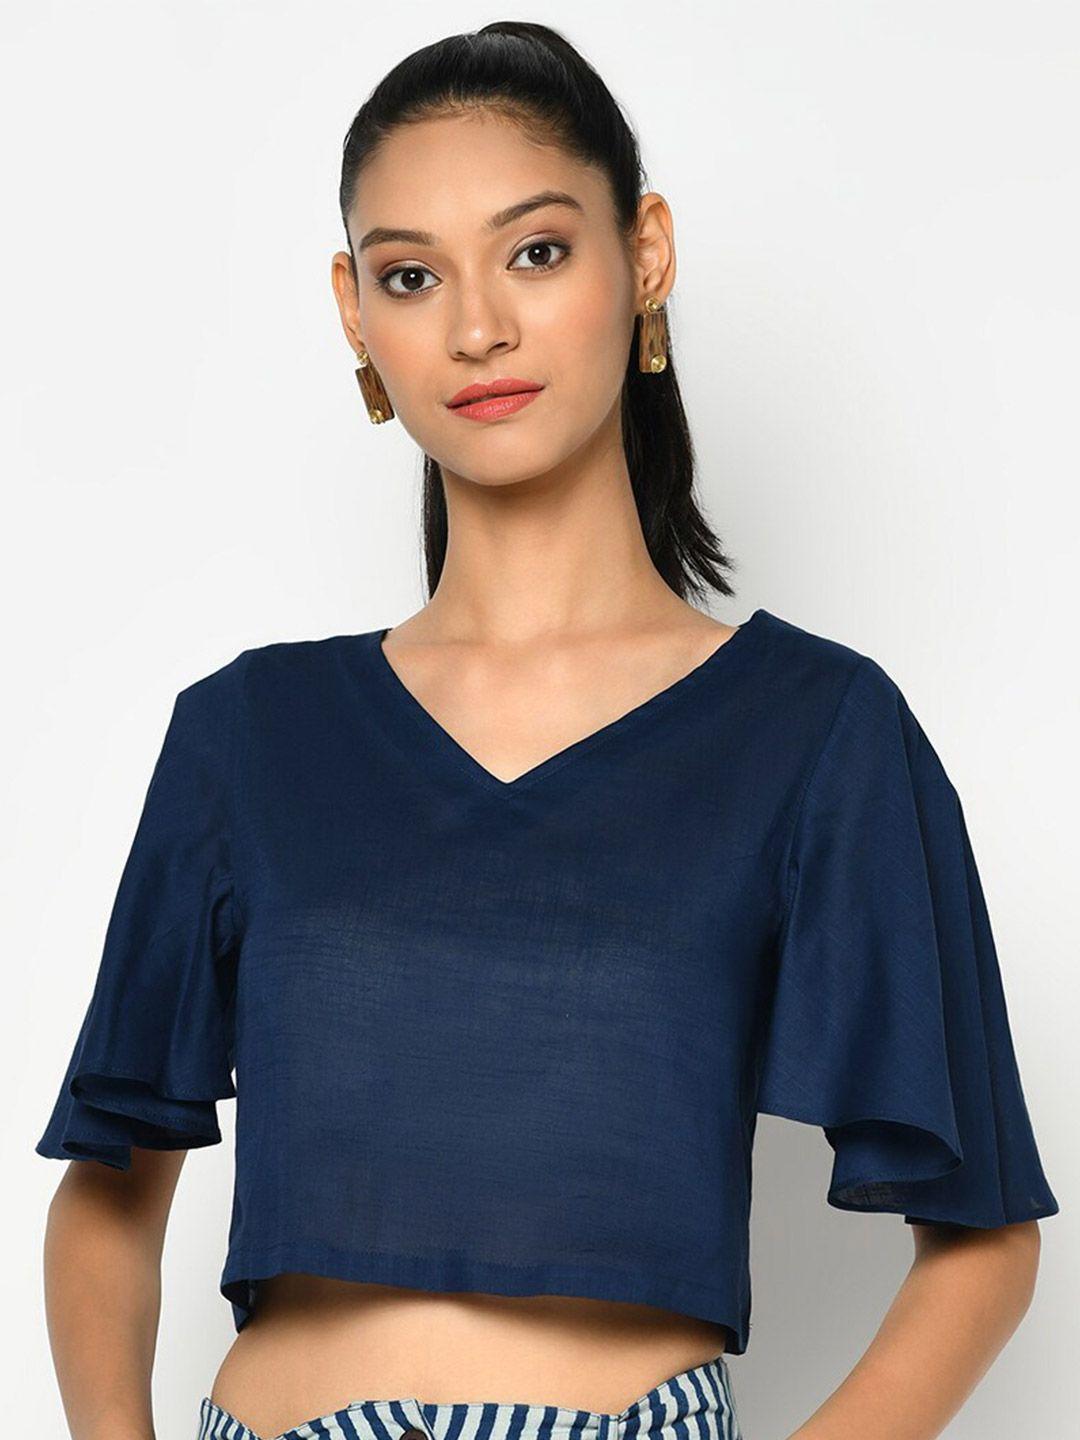 fabindia-blue-solid-pure-cotton-crop-top